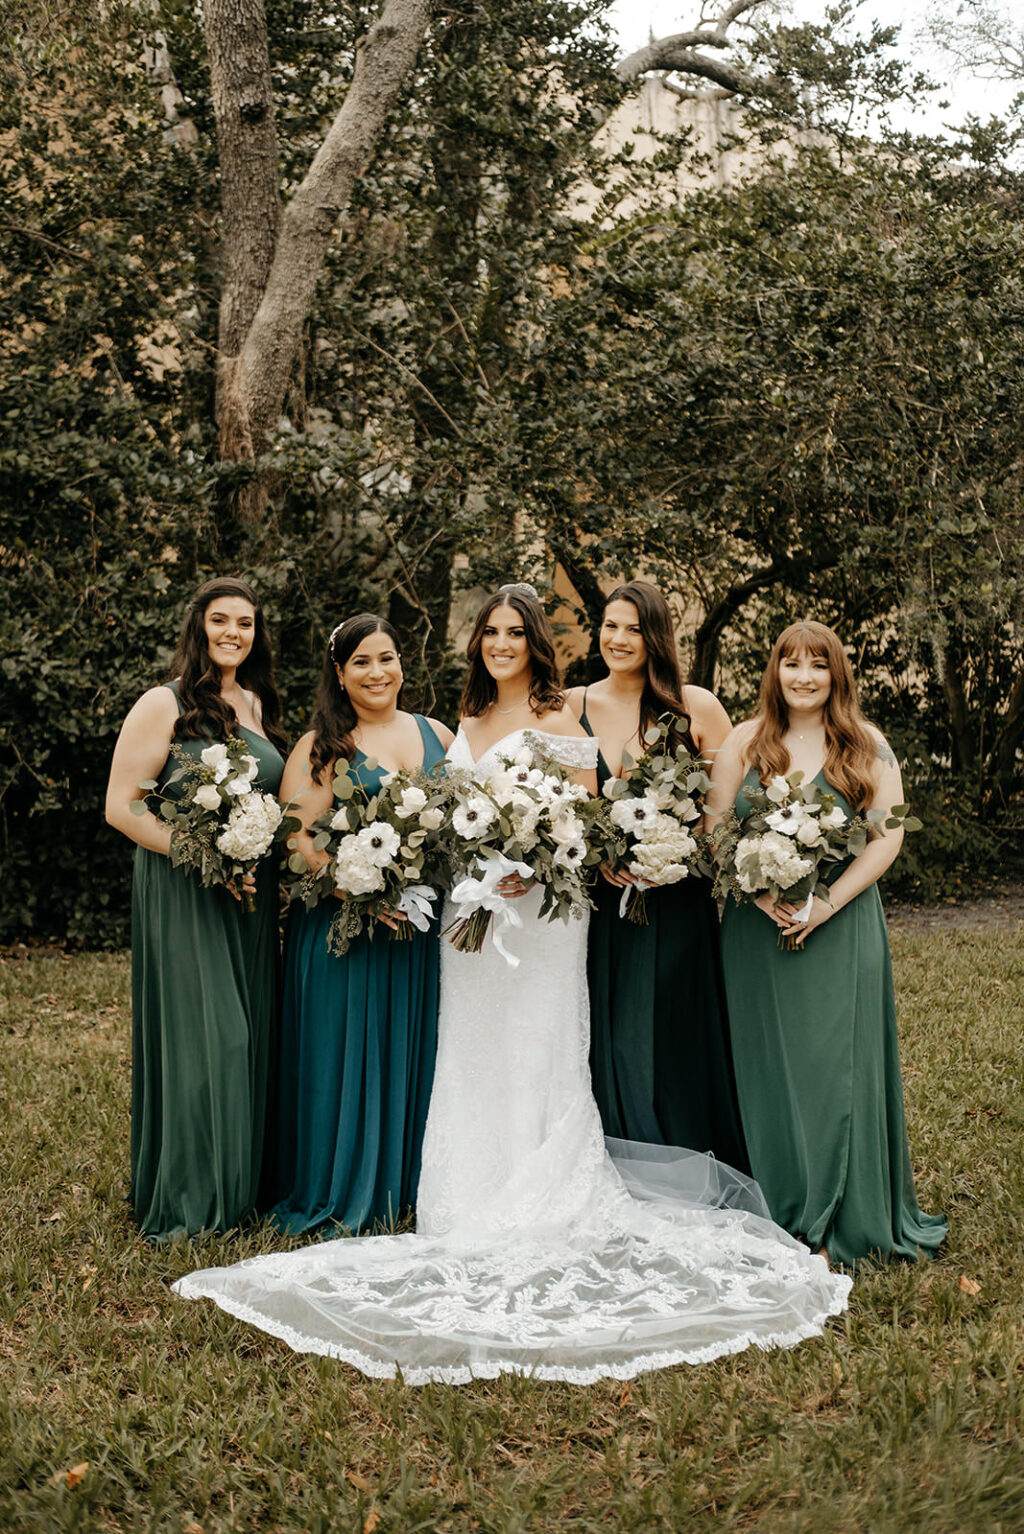 Bride with Bridesmaids in Emerald Green Mix and Match Floor Length Dress with White Flower Bouquets | Wedding Planner Eventfull Weddings